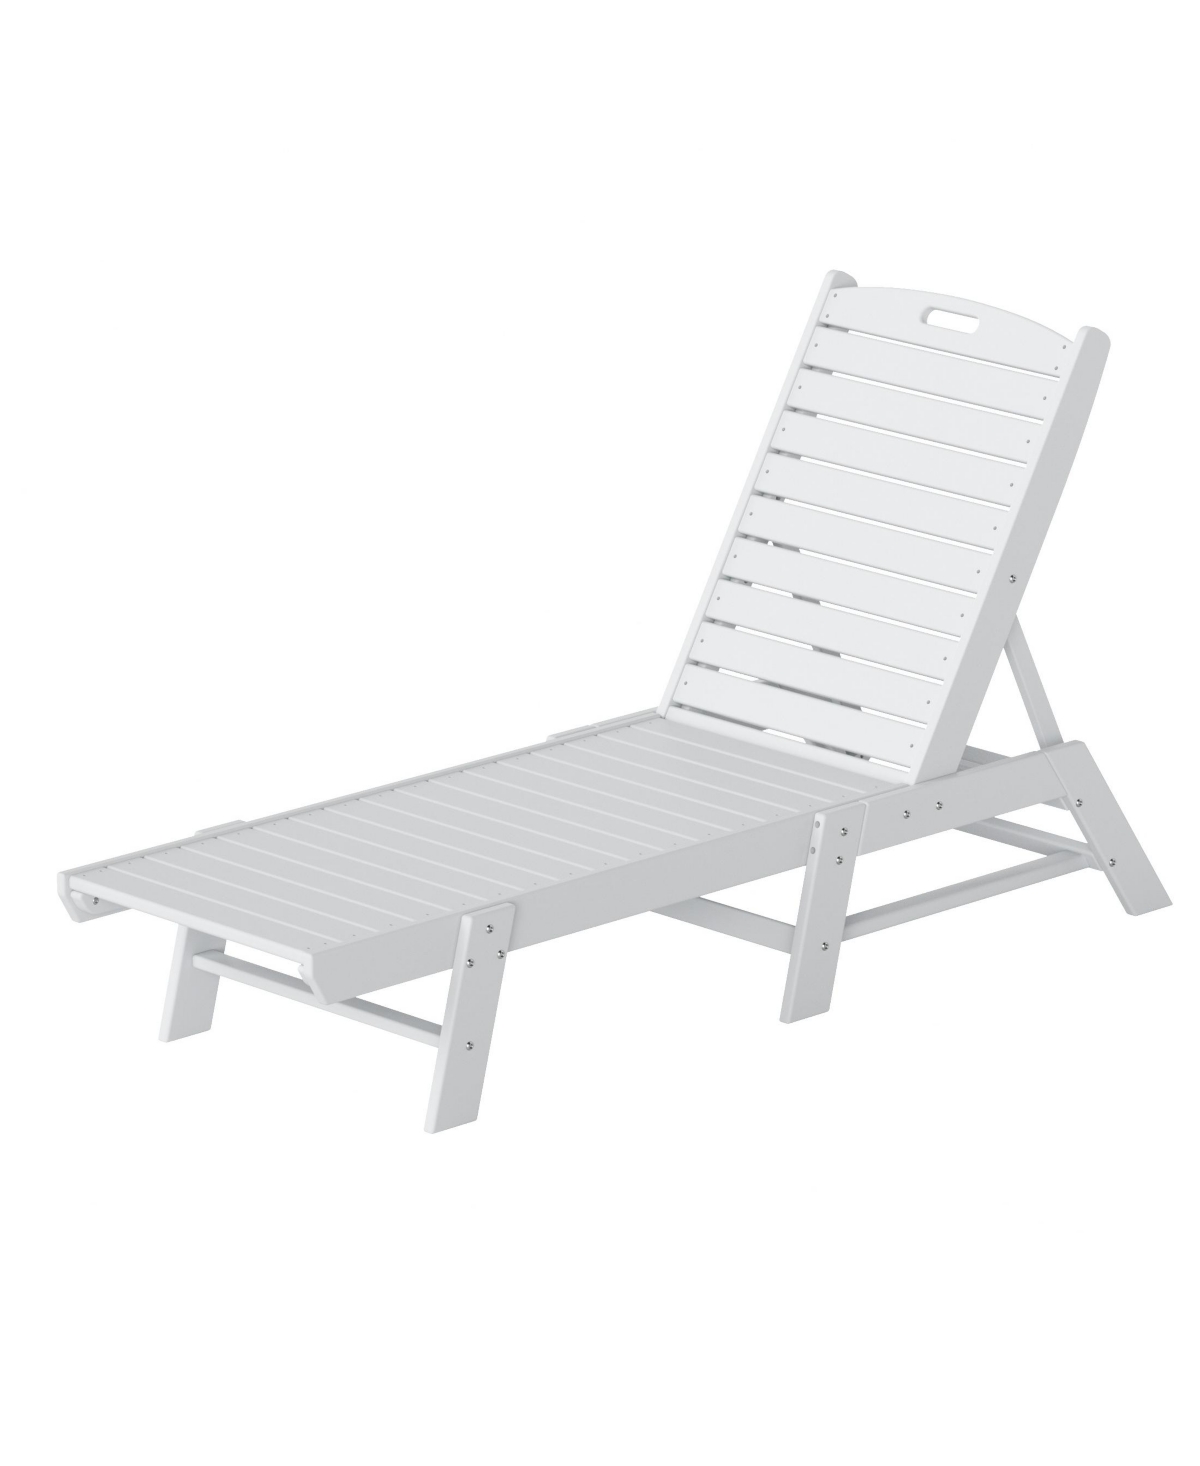 Westintrends Poly Reclining Outdoor Patio Chaise Lounge Chair Adjustable In White